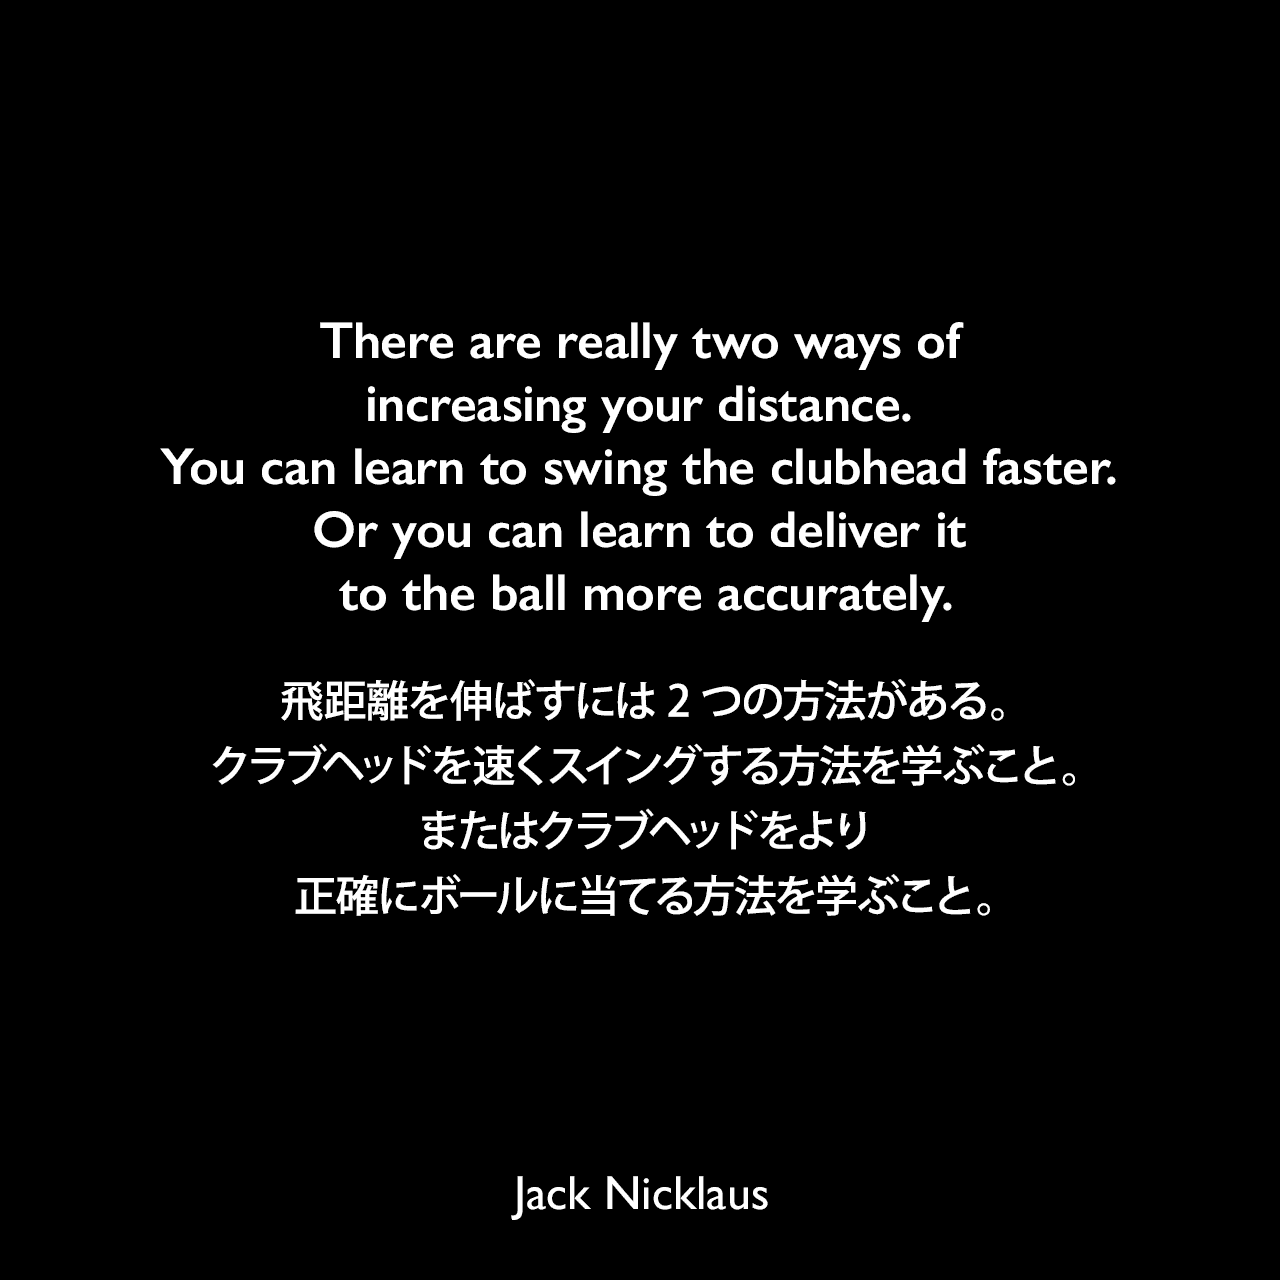 There are really two ways of increasing your distance. You can learn to swing the clubhead faster. Or you can learn to deliver it to the ball more accurately.飛距離を伸ばすには2つの方法がある。クラブヘッドを速くスイングする方法を学ぶこと。またはクラブヘッドをより正確にボールに当てる方法を学ぶこと。Jack Nicklaus